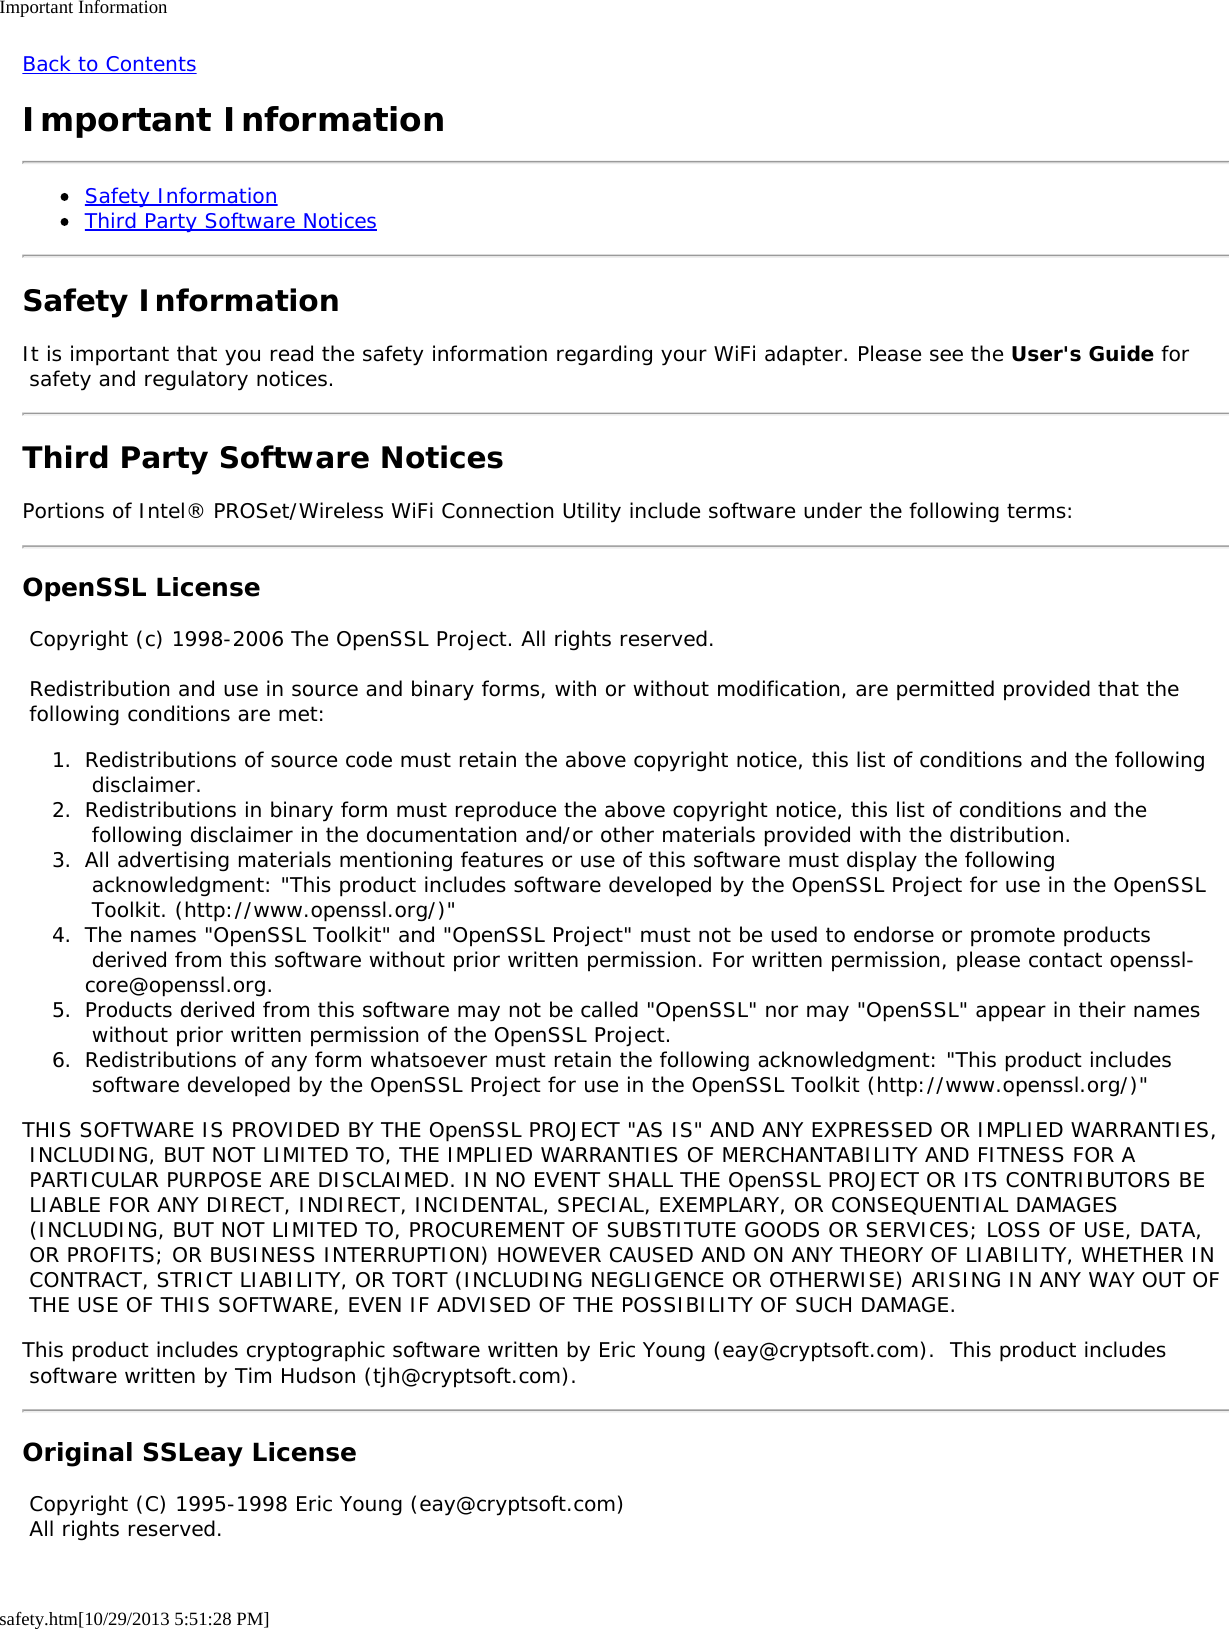 Important Informationsafety.htm[10/29/2013 5:51:28 PM]Back to ContentsImportant InformationSafety InformationThird Party Software NoticesSafety InformationIt is important that you read the safety information regarding your WiFi adapter. Please see the User&apos;s Guide for safety and regulatory notices.Third Party Software NoticesPortions of Intel® PROSet/Wireless WiFi Connection Utility include software under the following terms:OpenSSL License Copyright (c) 1998-2006 The OpenSSL Project. All rights reserved. Redistribution and use in source and binary forms, with or without modification, are permitted provided that the following conditions are met:1.  Redistributions of source code must retain the above copyright notice, this list of conditions and the following disclaimer.2.  Redistributions in binary form must reproduce the above copyright notice, this list of conditions and the following disclaimer in the documentation and/or other materials provided with the distribution.3.  All advertising materials mentioning features or use of this software must display the following acknowledgment: &quot;This product includes software developed by the OpenSSL Project for use in the OpenSSL Toolkit. (http://www.openssl.org/)&quot;4.  The names &quot;OpenSSL Toolkit&quot; and &quot;OpenSSL Project&quot; must not be used to endorse or promote products derived from this software without prior written permission. For written permission, please contact openssl-core@openssl.org.5.  Products derived from this software may not be called &quot;OpenSSL&quot; nor may &quot;OpenSSL&quot; appear in their names without prior written permission of the OpenSSL Project.6.  Redistributions of any form whatsoever must retain the following acknowledgment: &quot;This product includes software developed by the OpenSSL Project for use in the OpenSSL Toolkit (http://www.openssl.org/)&quot;THIS SOFTWARE IS PROVIDED BY THE OpenSSL PROJECT &quot;AS IS&quot; AND ANY EXPRESSED OR IMPLIED WARRANTIES, INCLUDING, BUT NOT LIMITED TO, THE IMPLIED WARRANTIES OF MERCHANTABILITY AND FITNESS FOR A PARTICULAR PURPOSE ARE DISCLAIMED. IN NO EVENT SHALL THE OpenSSL PROJECT OR ITS CONTRIBUTORS BE LIABLE FOR ANY DIRECT, INDIRECT, INCIDENTAL, SPECIAL, EXEMPLARY, OR CONSEQUENTIAL DAMAGES (INCLUDING, BUT NOT LIMITED TO, PROCUREMENT OF SUBSTITUTE GOODS OR SERVICES; LOSS OF USE, DATA, OR PROFITS; OR BUSINESS INTERRUPTION) HOWEVER CAUSED AND ON ANY THEORY OF LIABILITY, WHETHER IN CONTRACT, STRICT LIABILITY, OR TORT (INCLUDING NEGLIGENCE OR OTHERWISE) ARISING IN ANY WAY OUT OF THE USE OF THIS SOFTWARE, EVEN IF ADVISED OF THE POSSIBILITY OF SUCH DAMAGE.This product includes cryptographic software written by Eric Young (eay@cryptsoft.com).  This product includes software written by Tim Hudson (tjh@cryptsoft.com).Original SSLeay License Copyright (C) 1995-1998 Eric Young (eay@cryptsoft.com) All rights reserved.